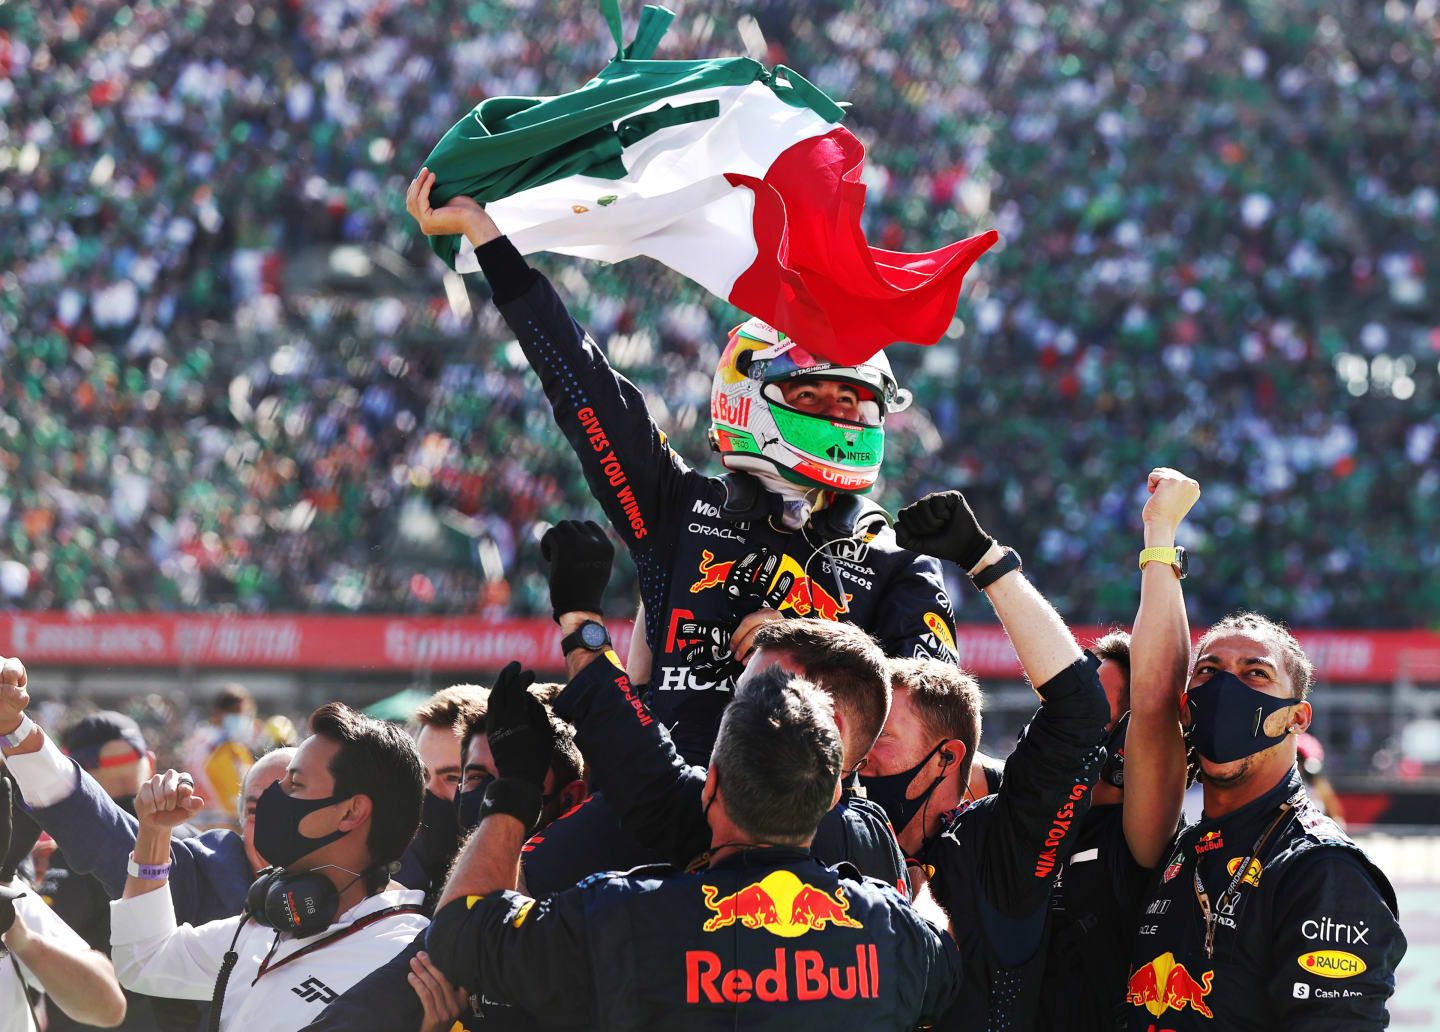 MEXICO CITY, MEXICO - NOVEMBER 07: Third placed Sergio Perez of Mexico and Red Bull Racing celebrates in parc ferme during the F1 Grand Prix of Mexico at Autodromo Hermanos Rodriguez on November 07, 2021 in Mexico City, Mexico. (Photo by Lars Baron/Getty Images)